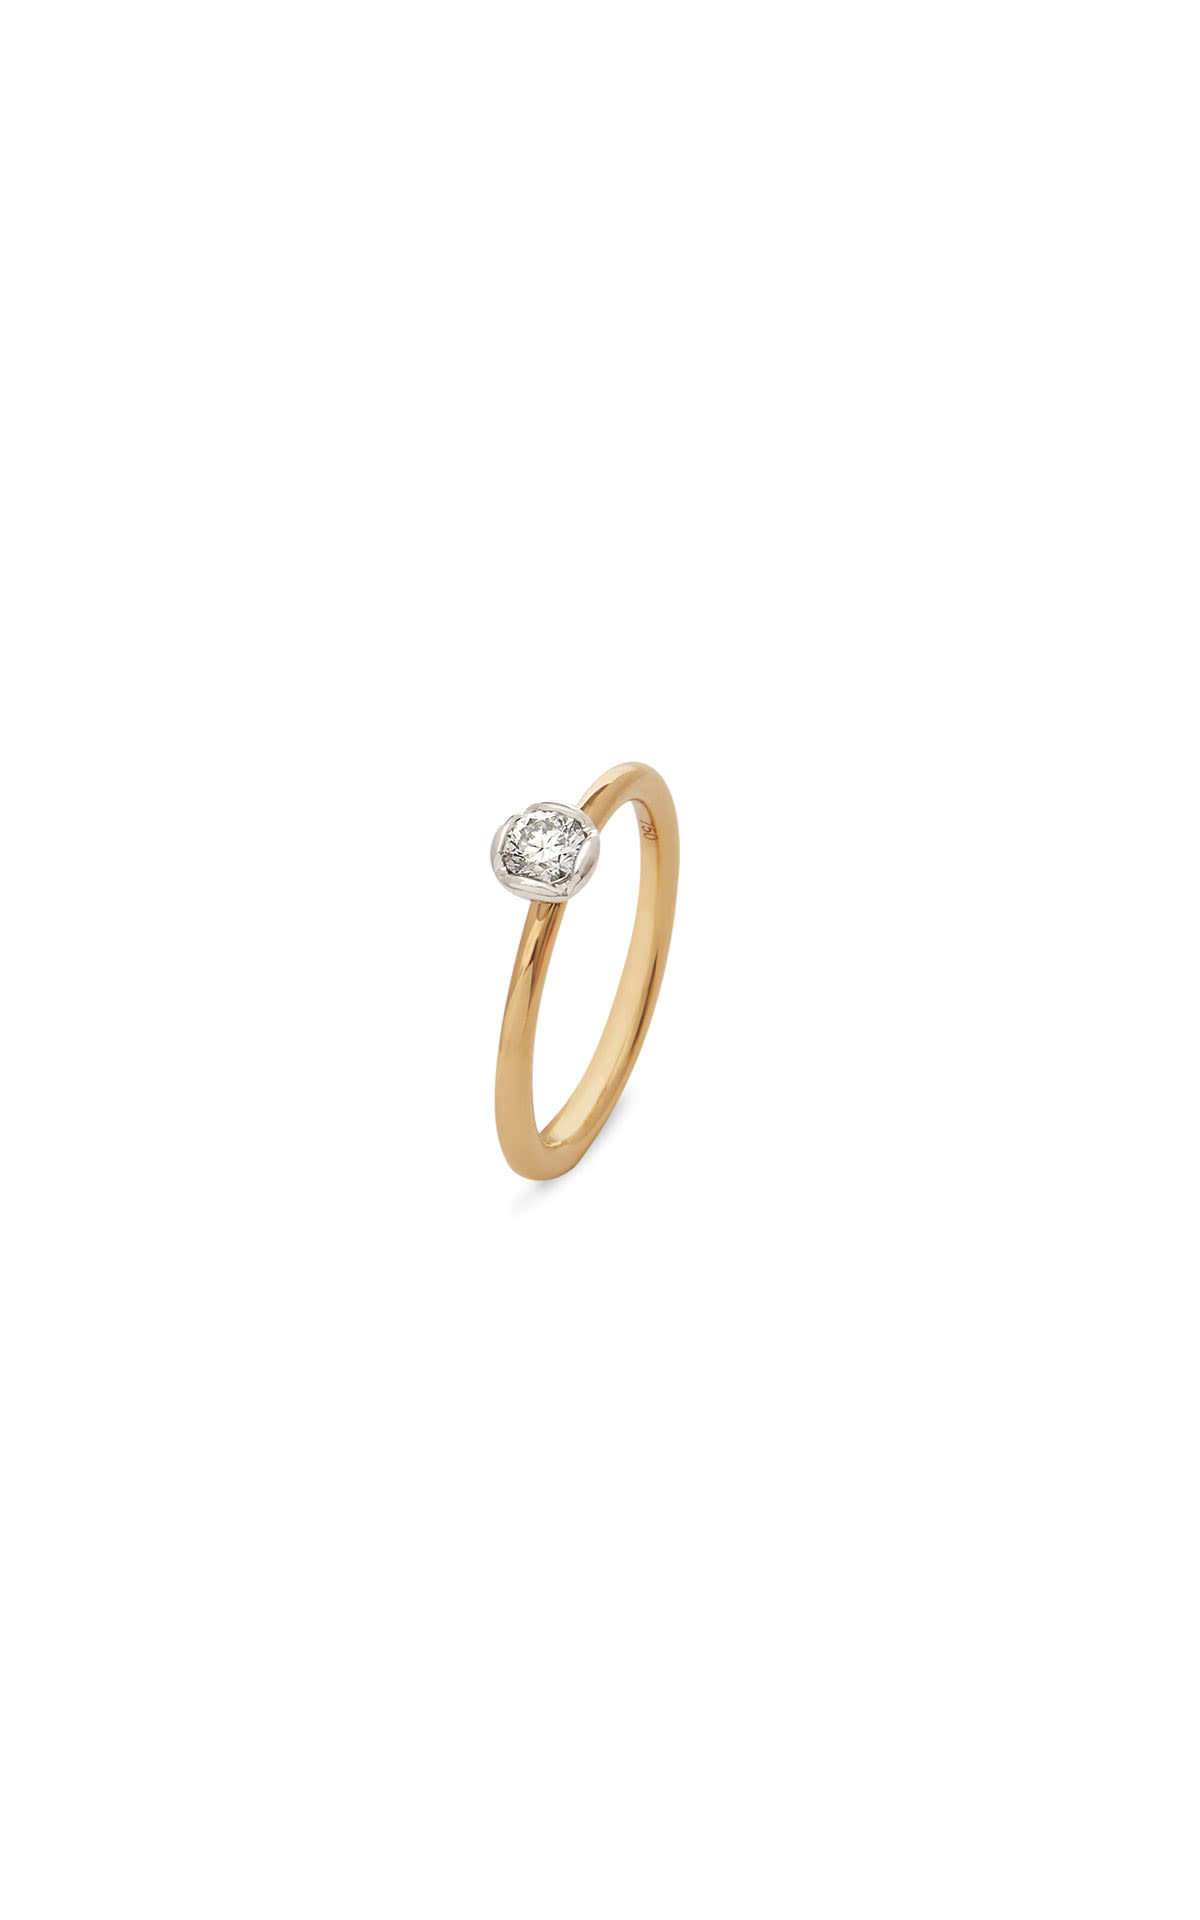 Annoushka Maguerite 18ct yellow gold solitaire ring from Bicester Village